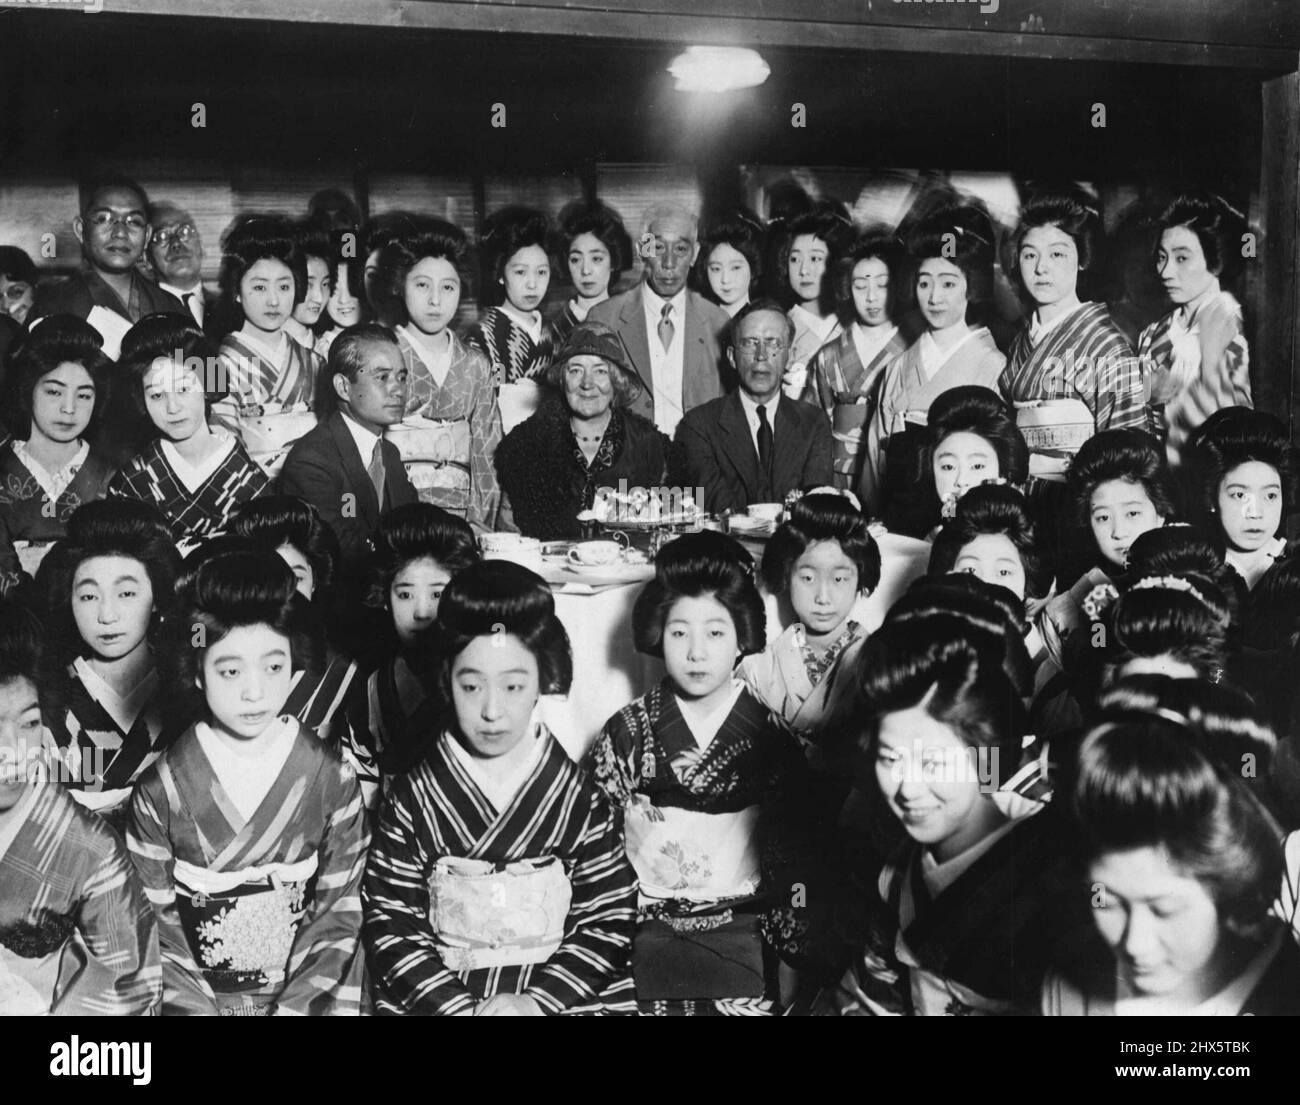 The League Of Nations White Slave Commission Visits Geisha School In Japan -- Dr. Bascom Johnson of the united states, seated at the right, with members of the league of nations white slave commission, during a visit to the geisha quarter of Tokyo. The geisha school at which this picture was made was established last year as a means of training geisha girls in modern methods of entertainment - ballet dancing, singing, English conversation, etc., seated next to Dr. Johnson is Dr. Aima Sunquist, second member of the commission which has been authorized to conduct the inquiry into the traffic in Stock Photo